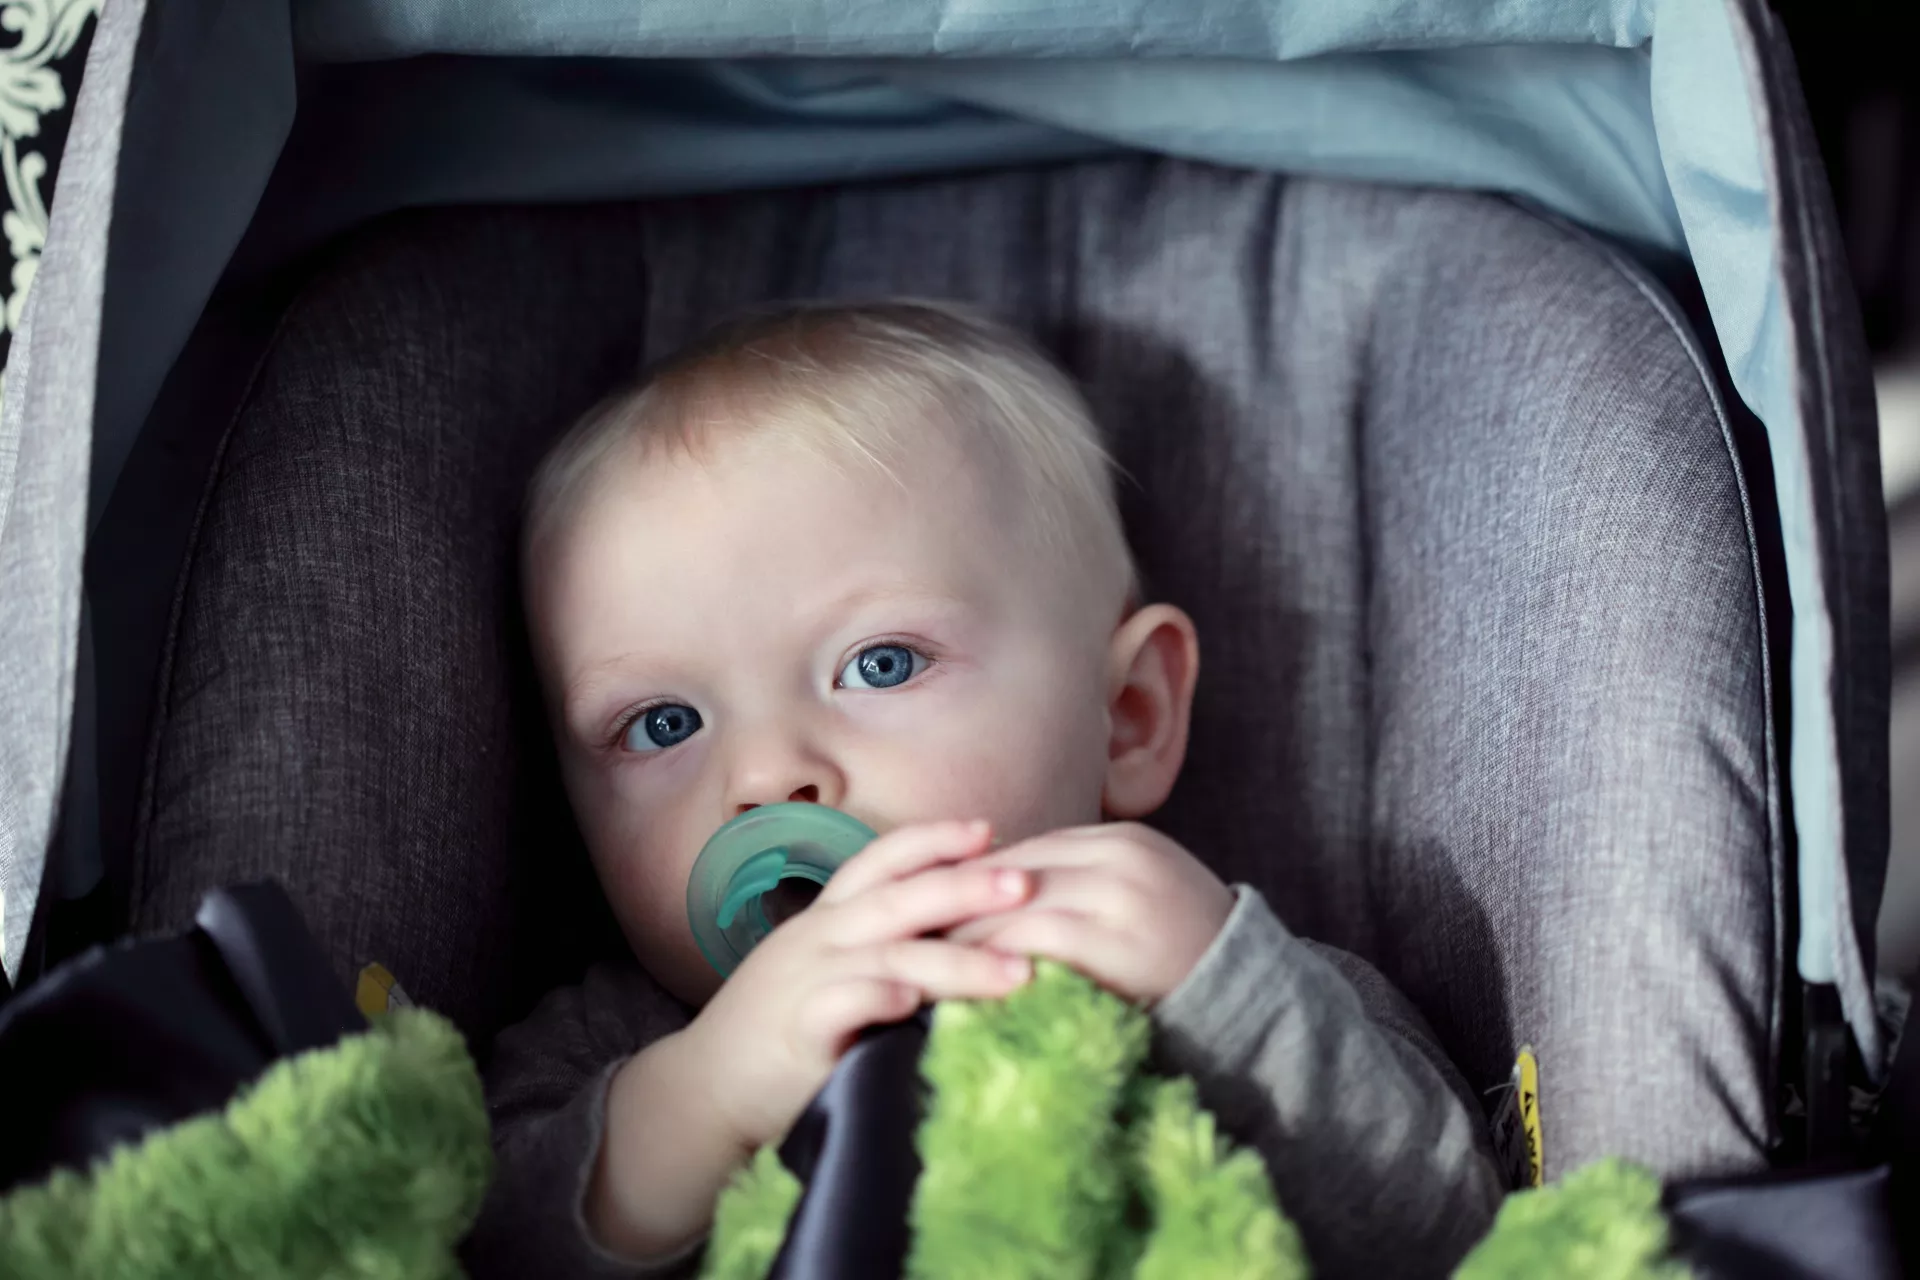 Sharon Mccutcheon: Baby in a car seat to represent Child Passenger Safety